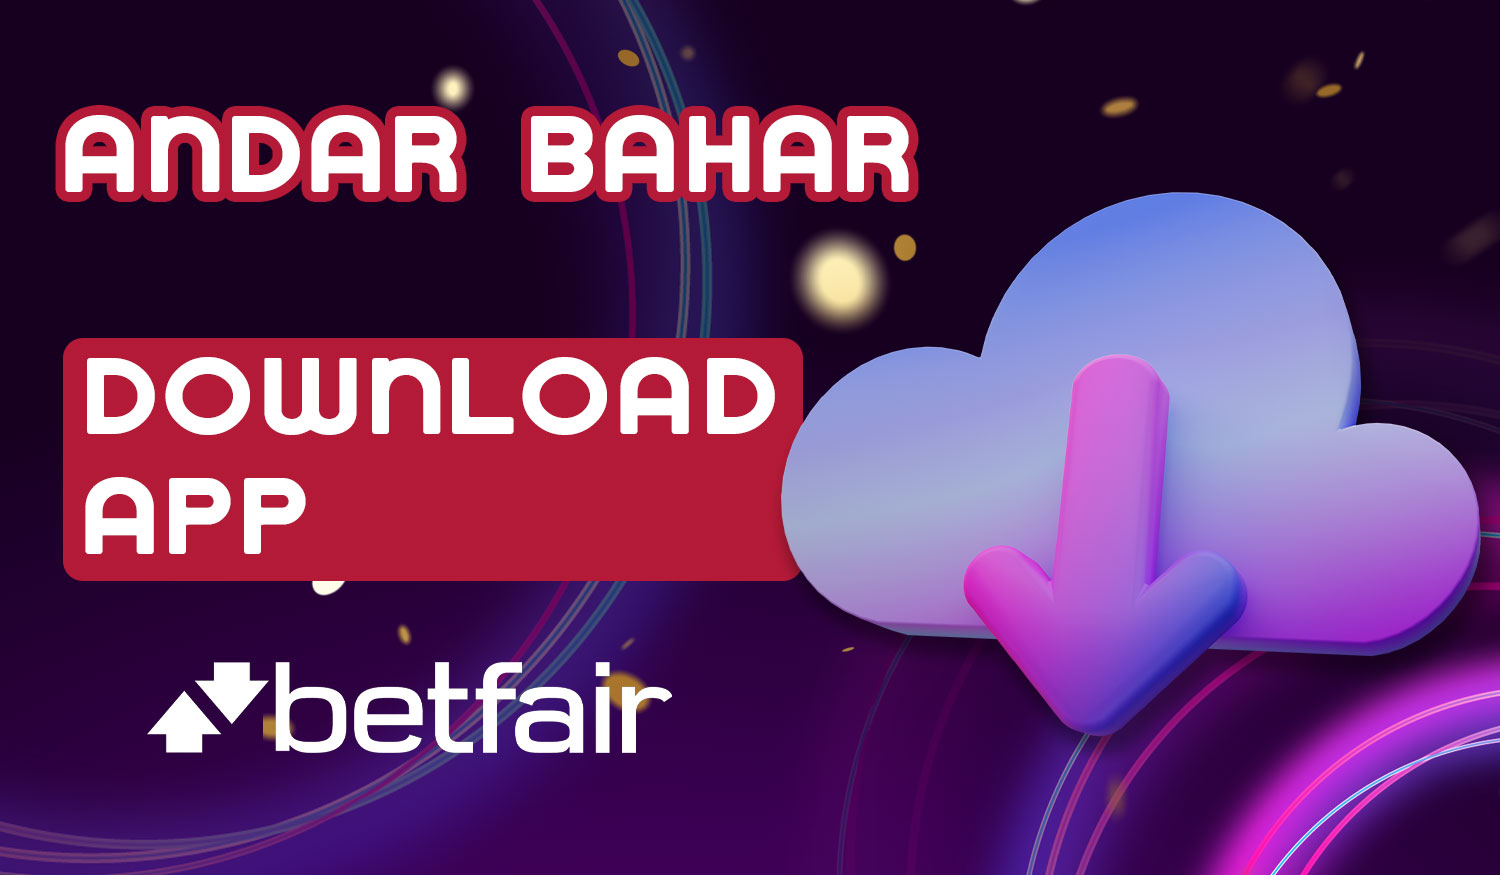 Detailed guide on how to download and install the Betfair India mobile application for playing Andar Bahar